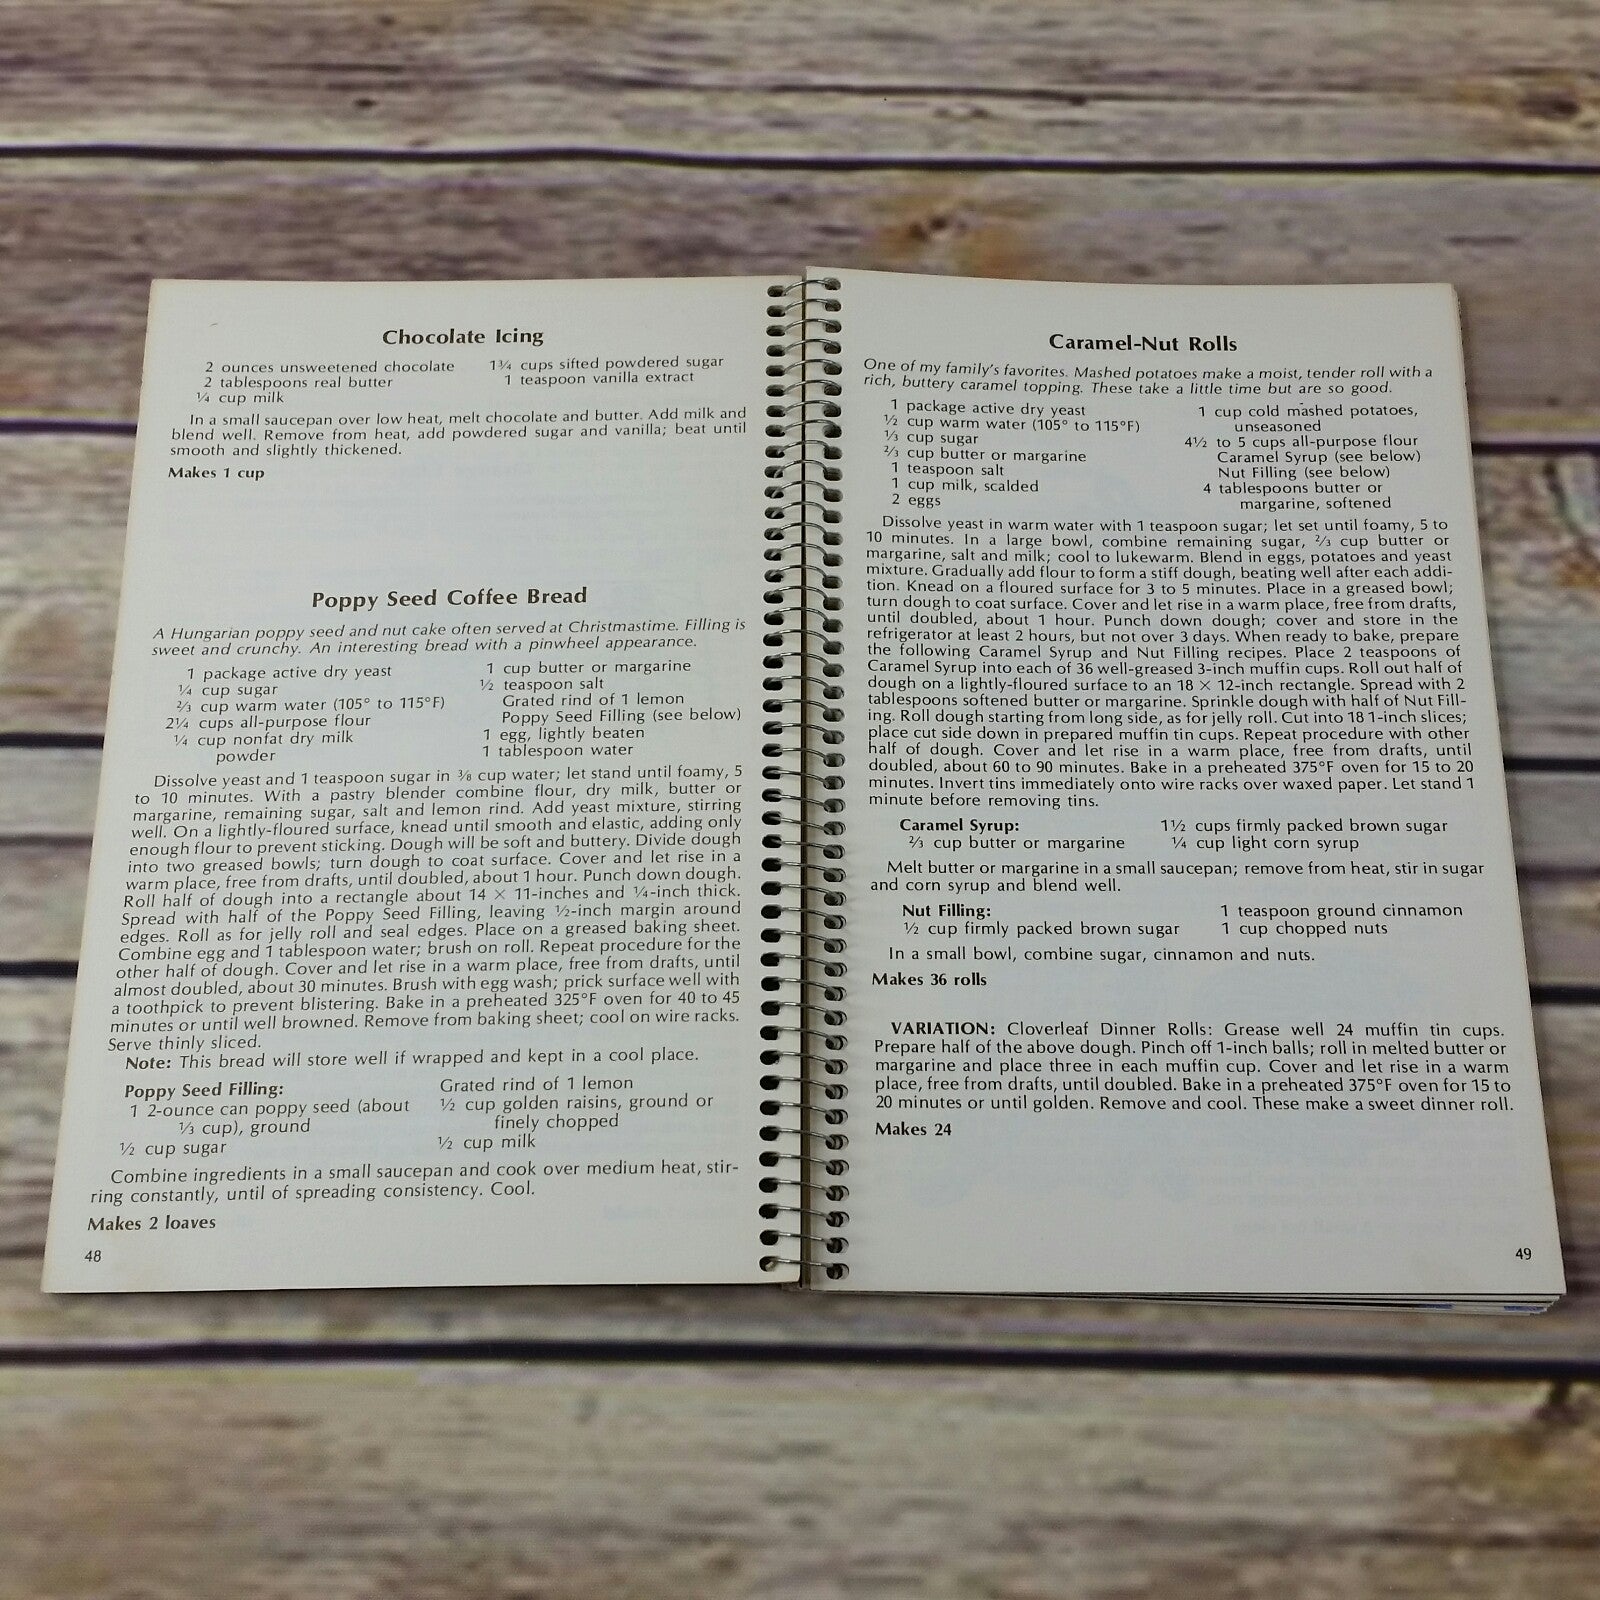 Vintage Bread Cookbook Fresh From the Oven Breads Recipes Miriam Loo 1982 - At Grandma's Table